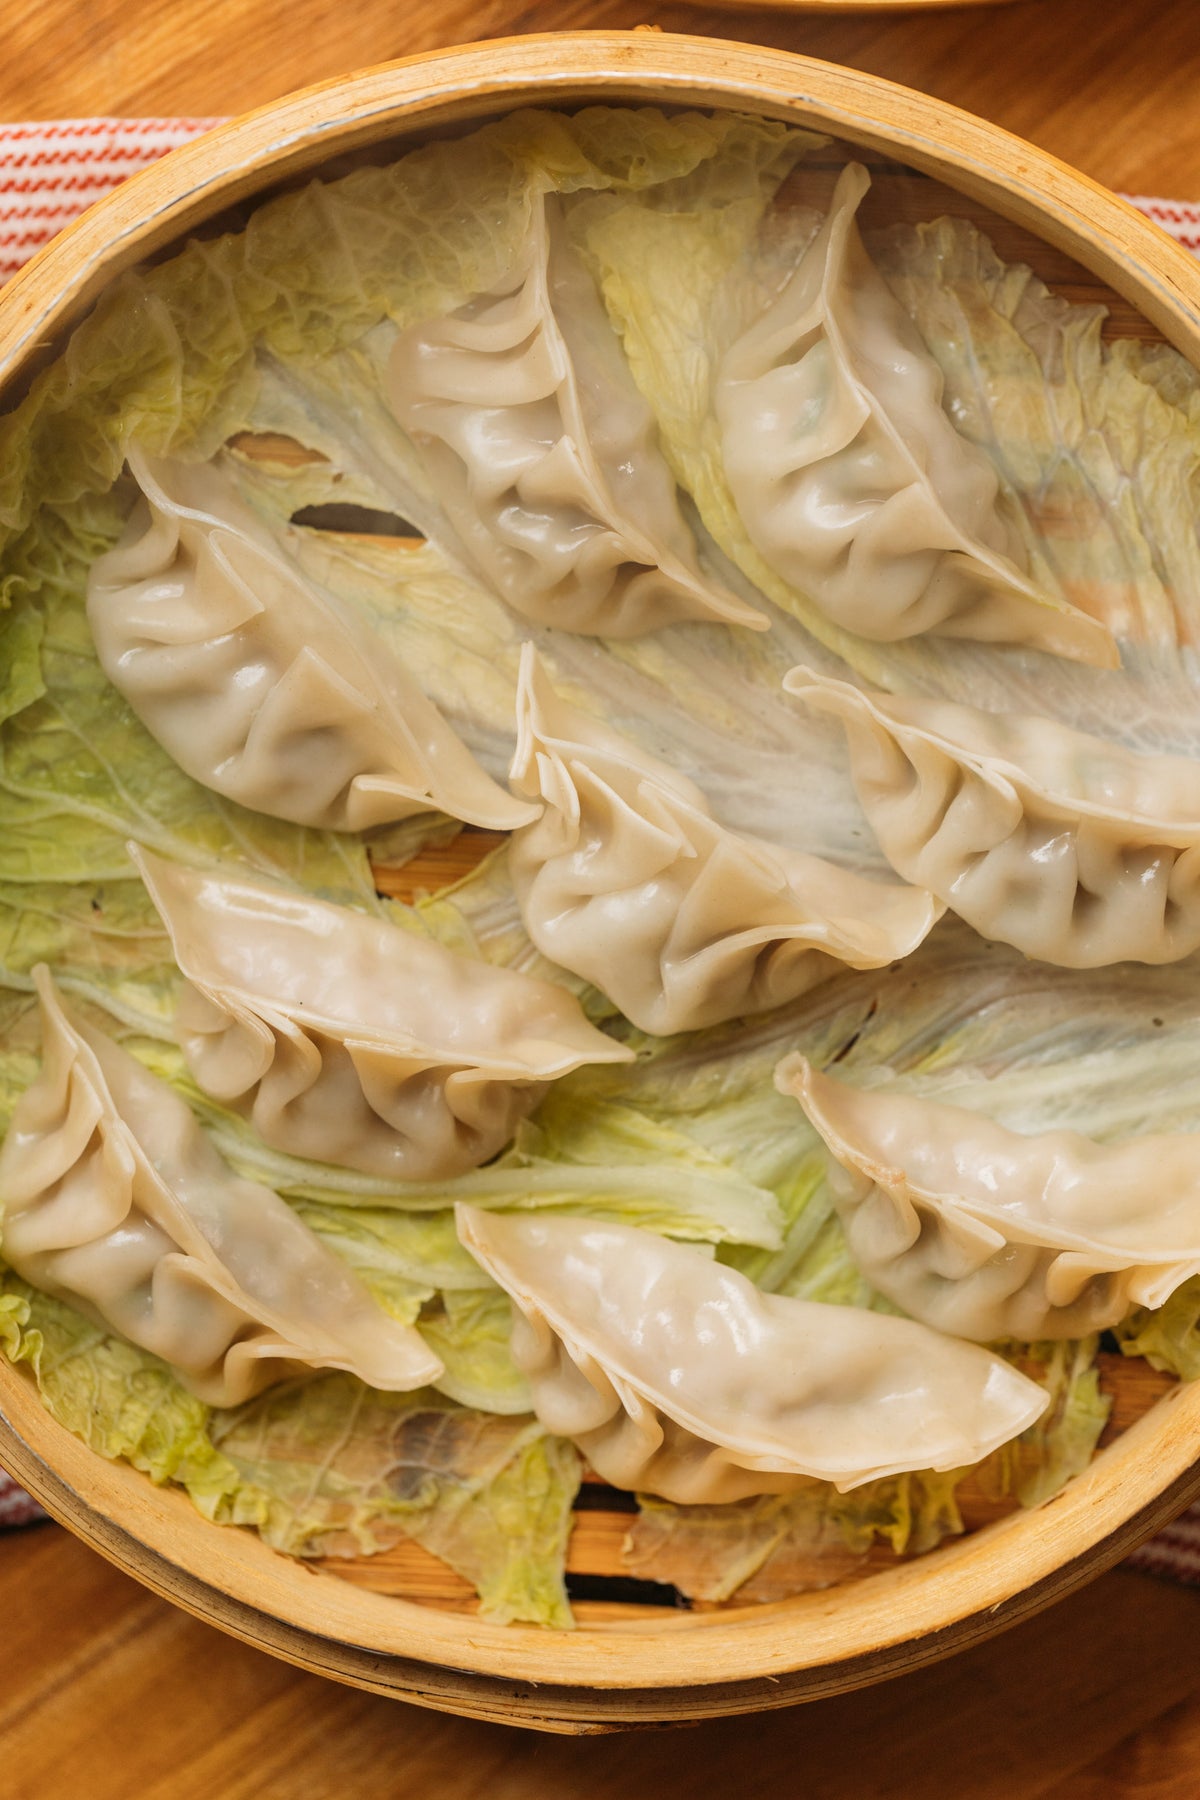 What Is a Dumpling? The History Behind This Delicious Food